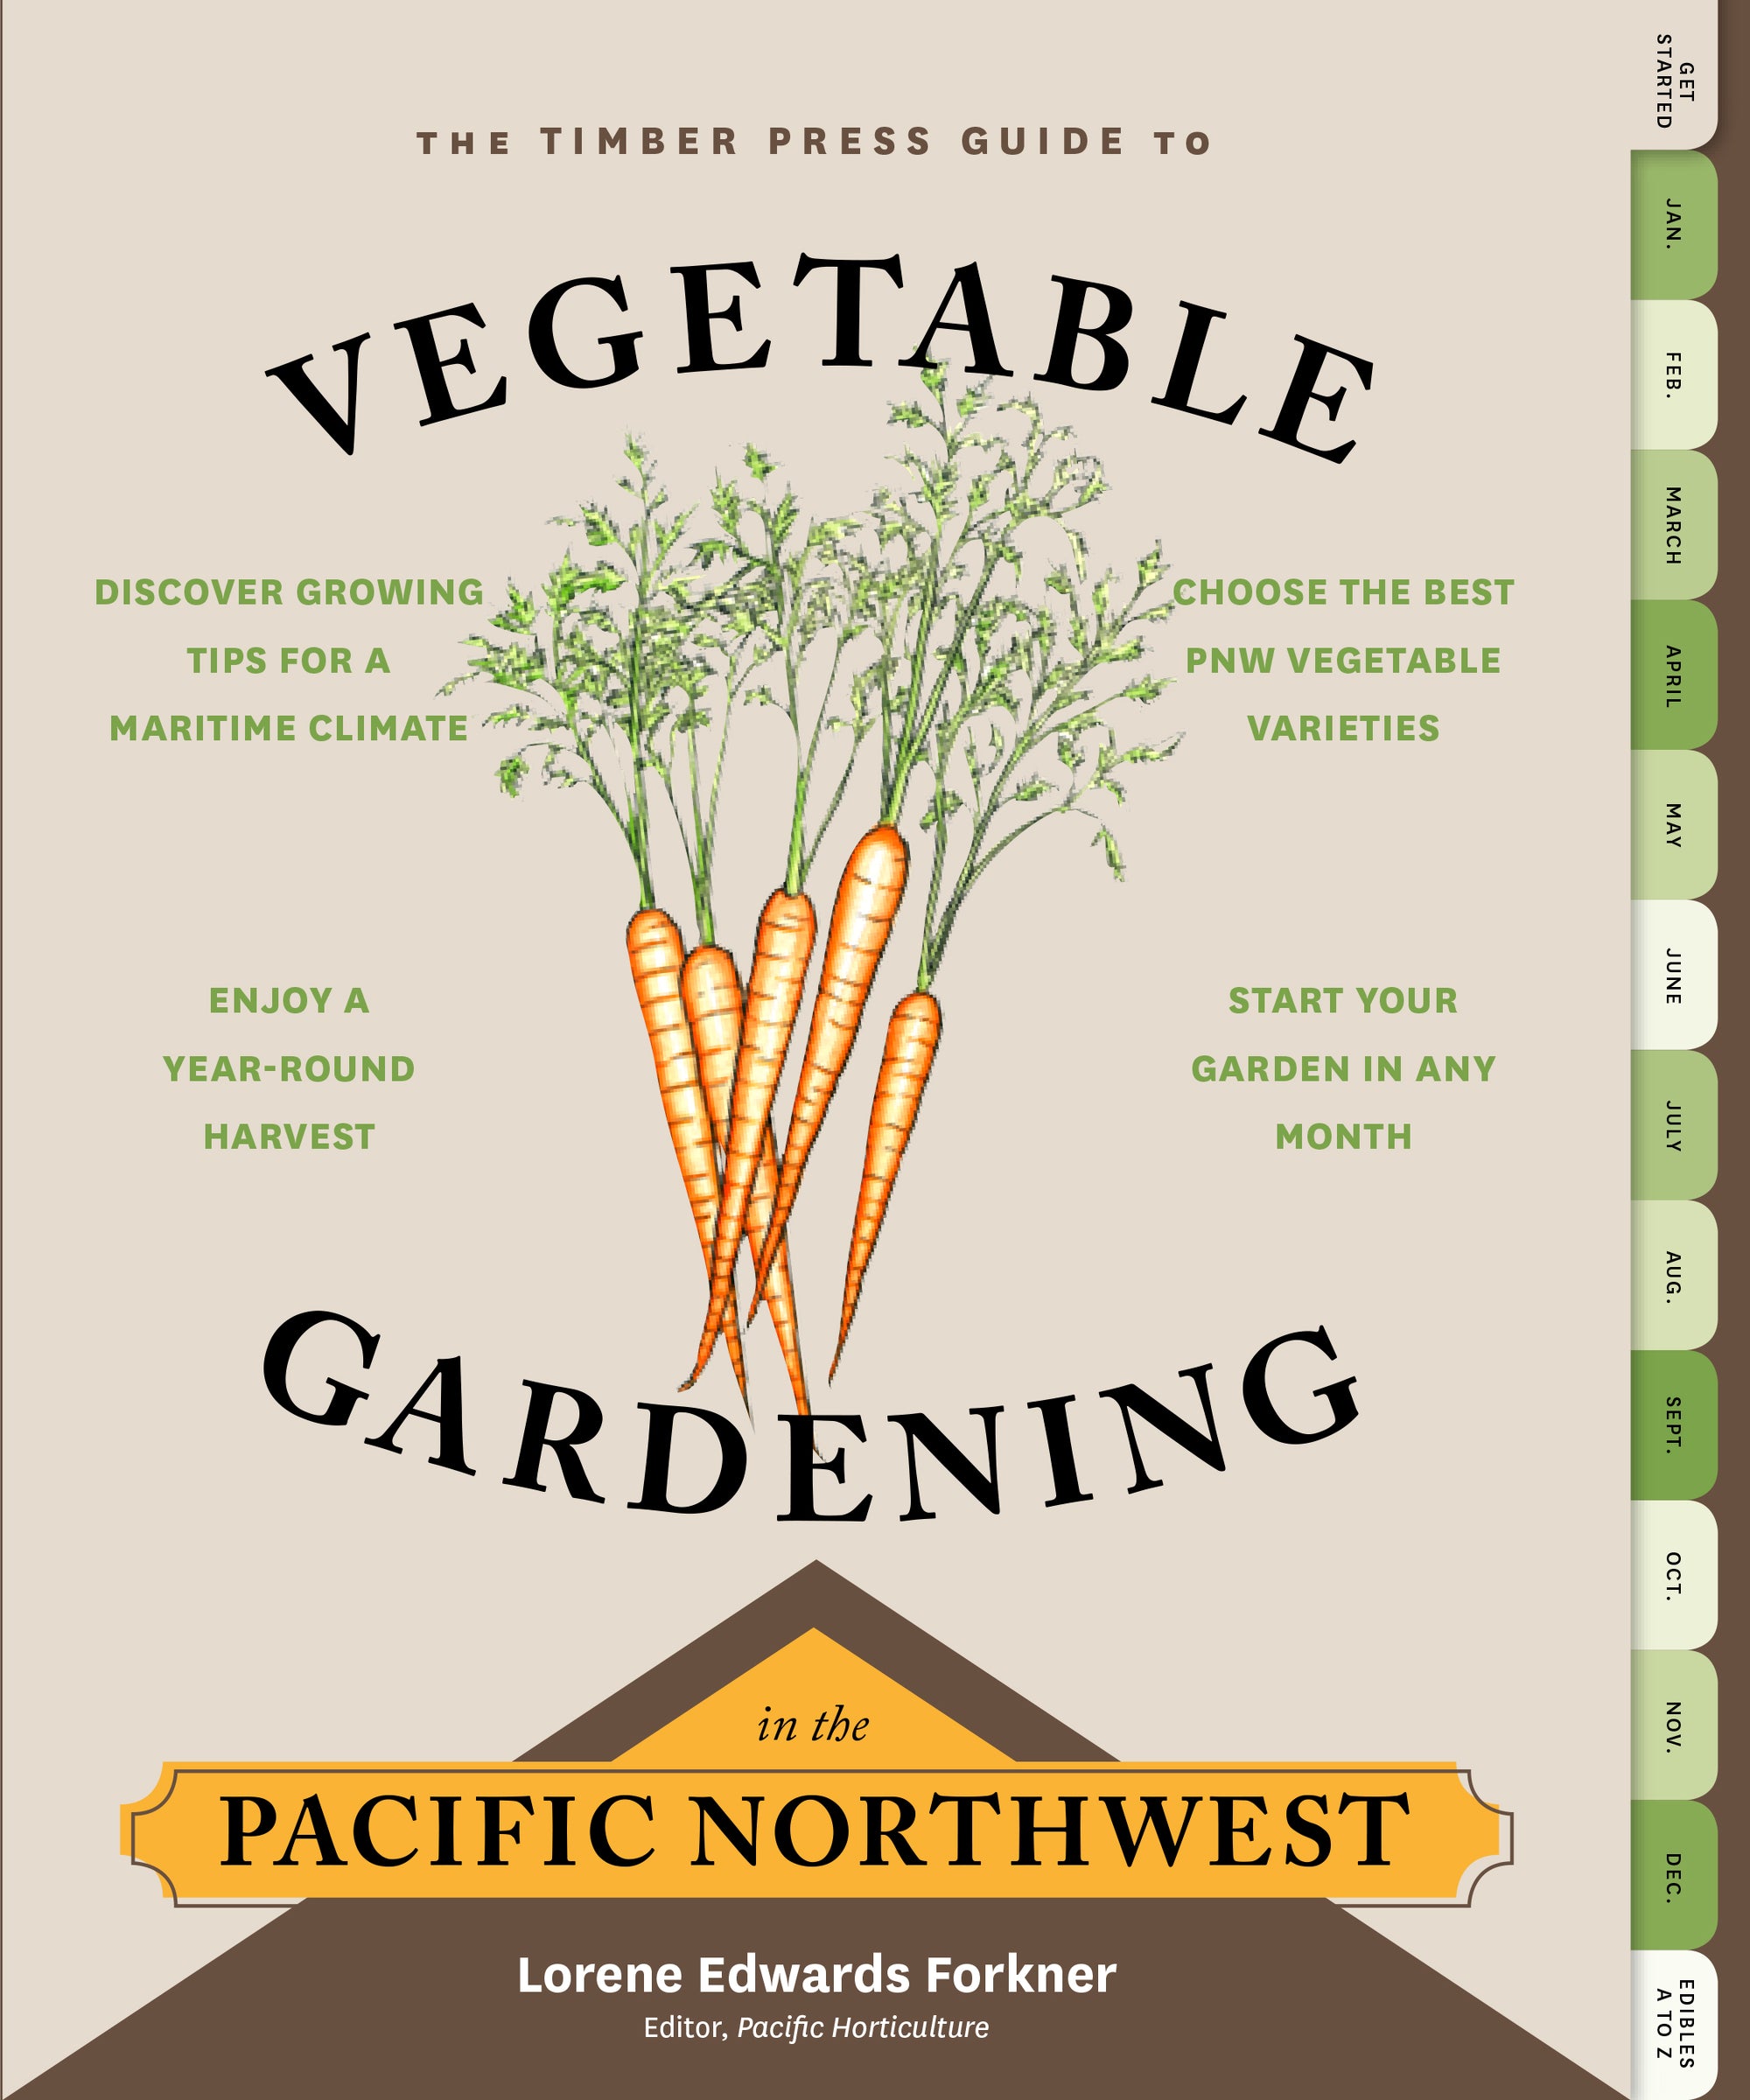 A book with a tan cover with an illustration of carrots on the front. There are green and white tabs on the side.